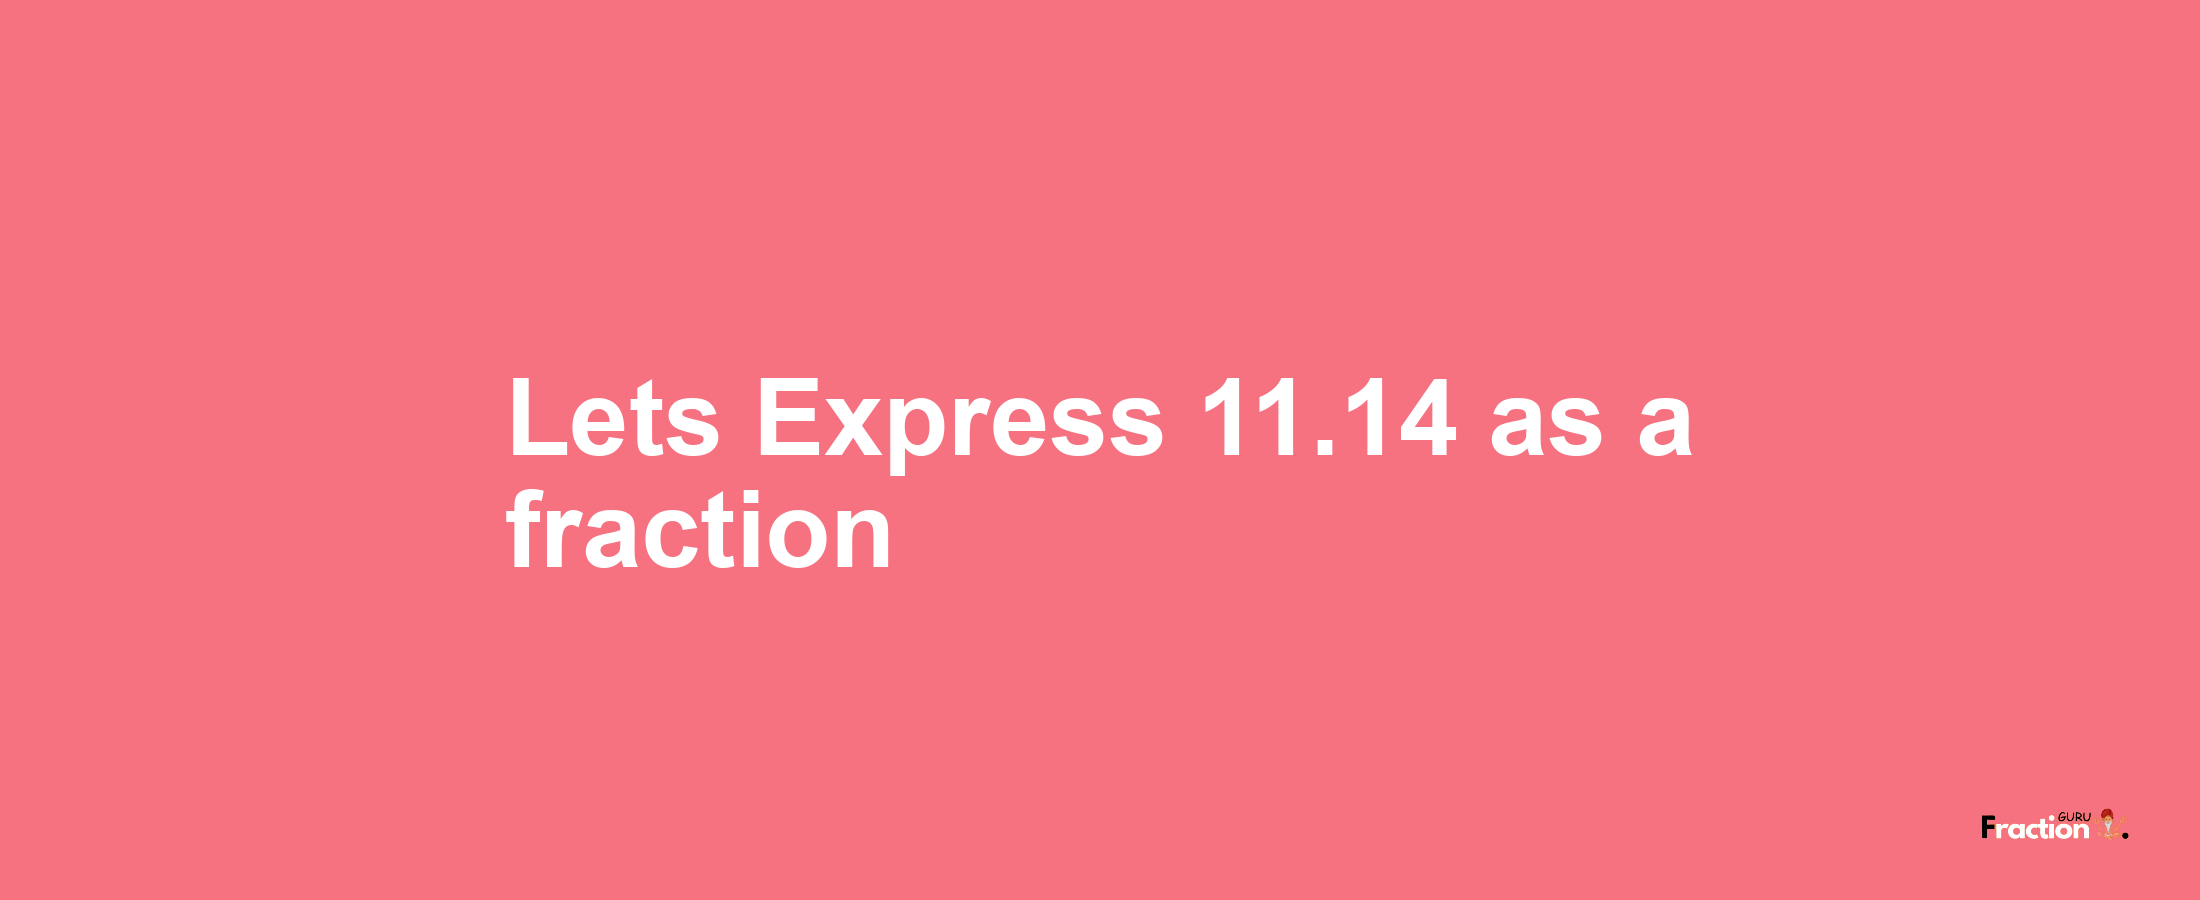 Lets Express 11.14 as afraction